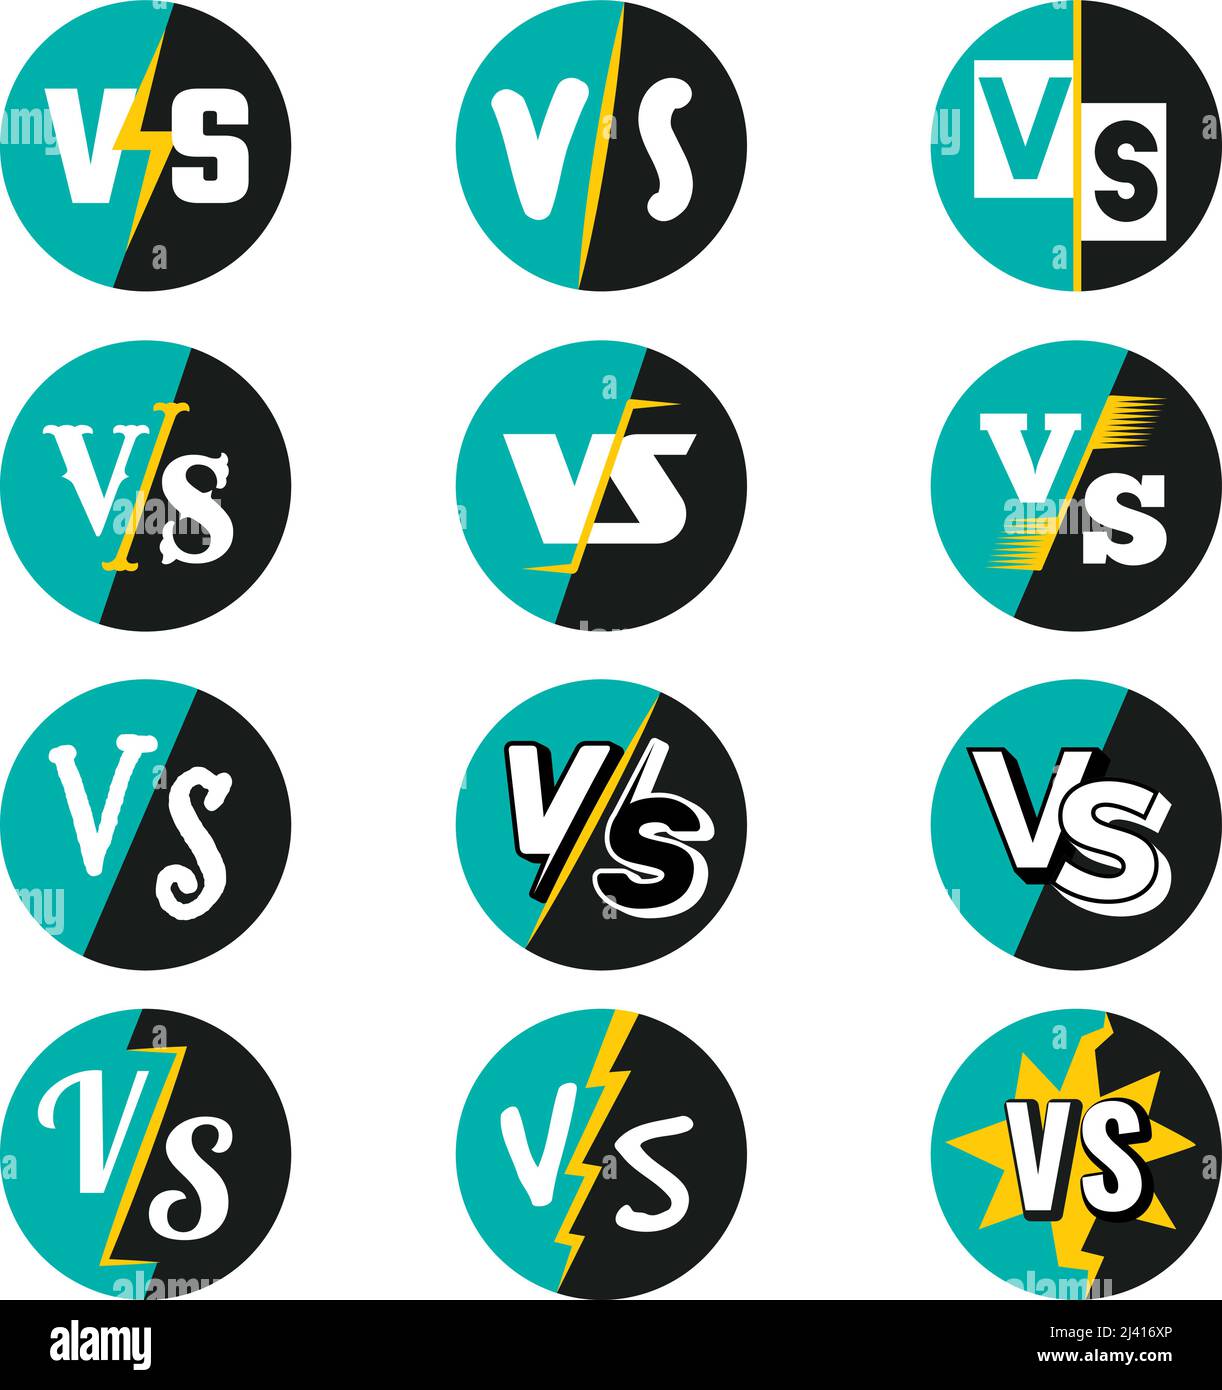 Vs logo. Battle fighting fonts duel characters matchmaking lettering words concurrence teams recent vector letters template Stock Vector